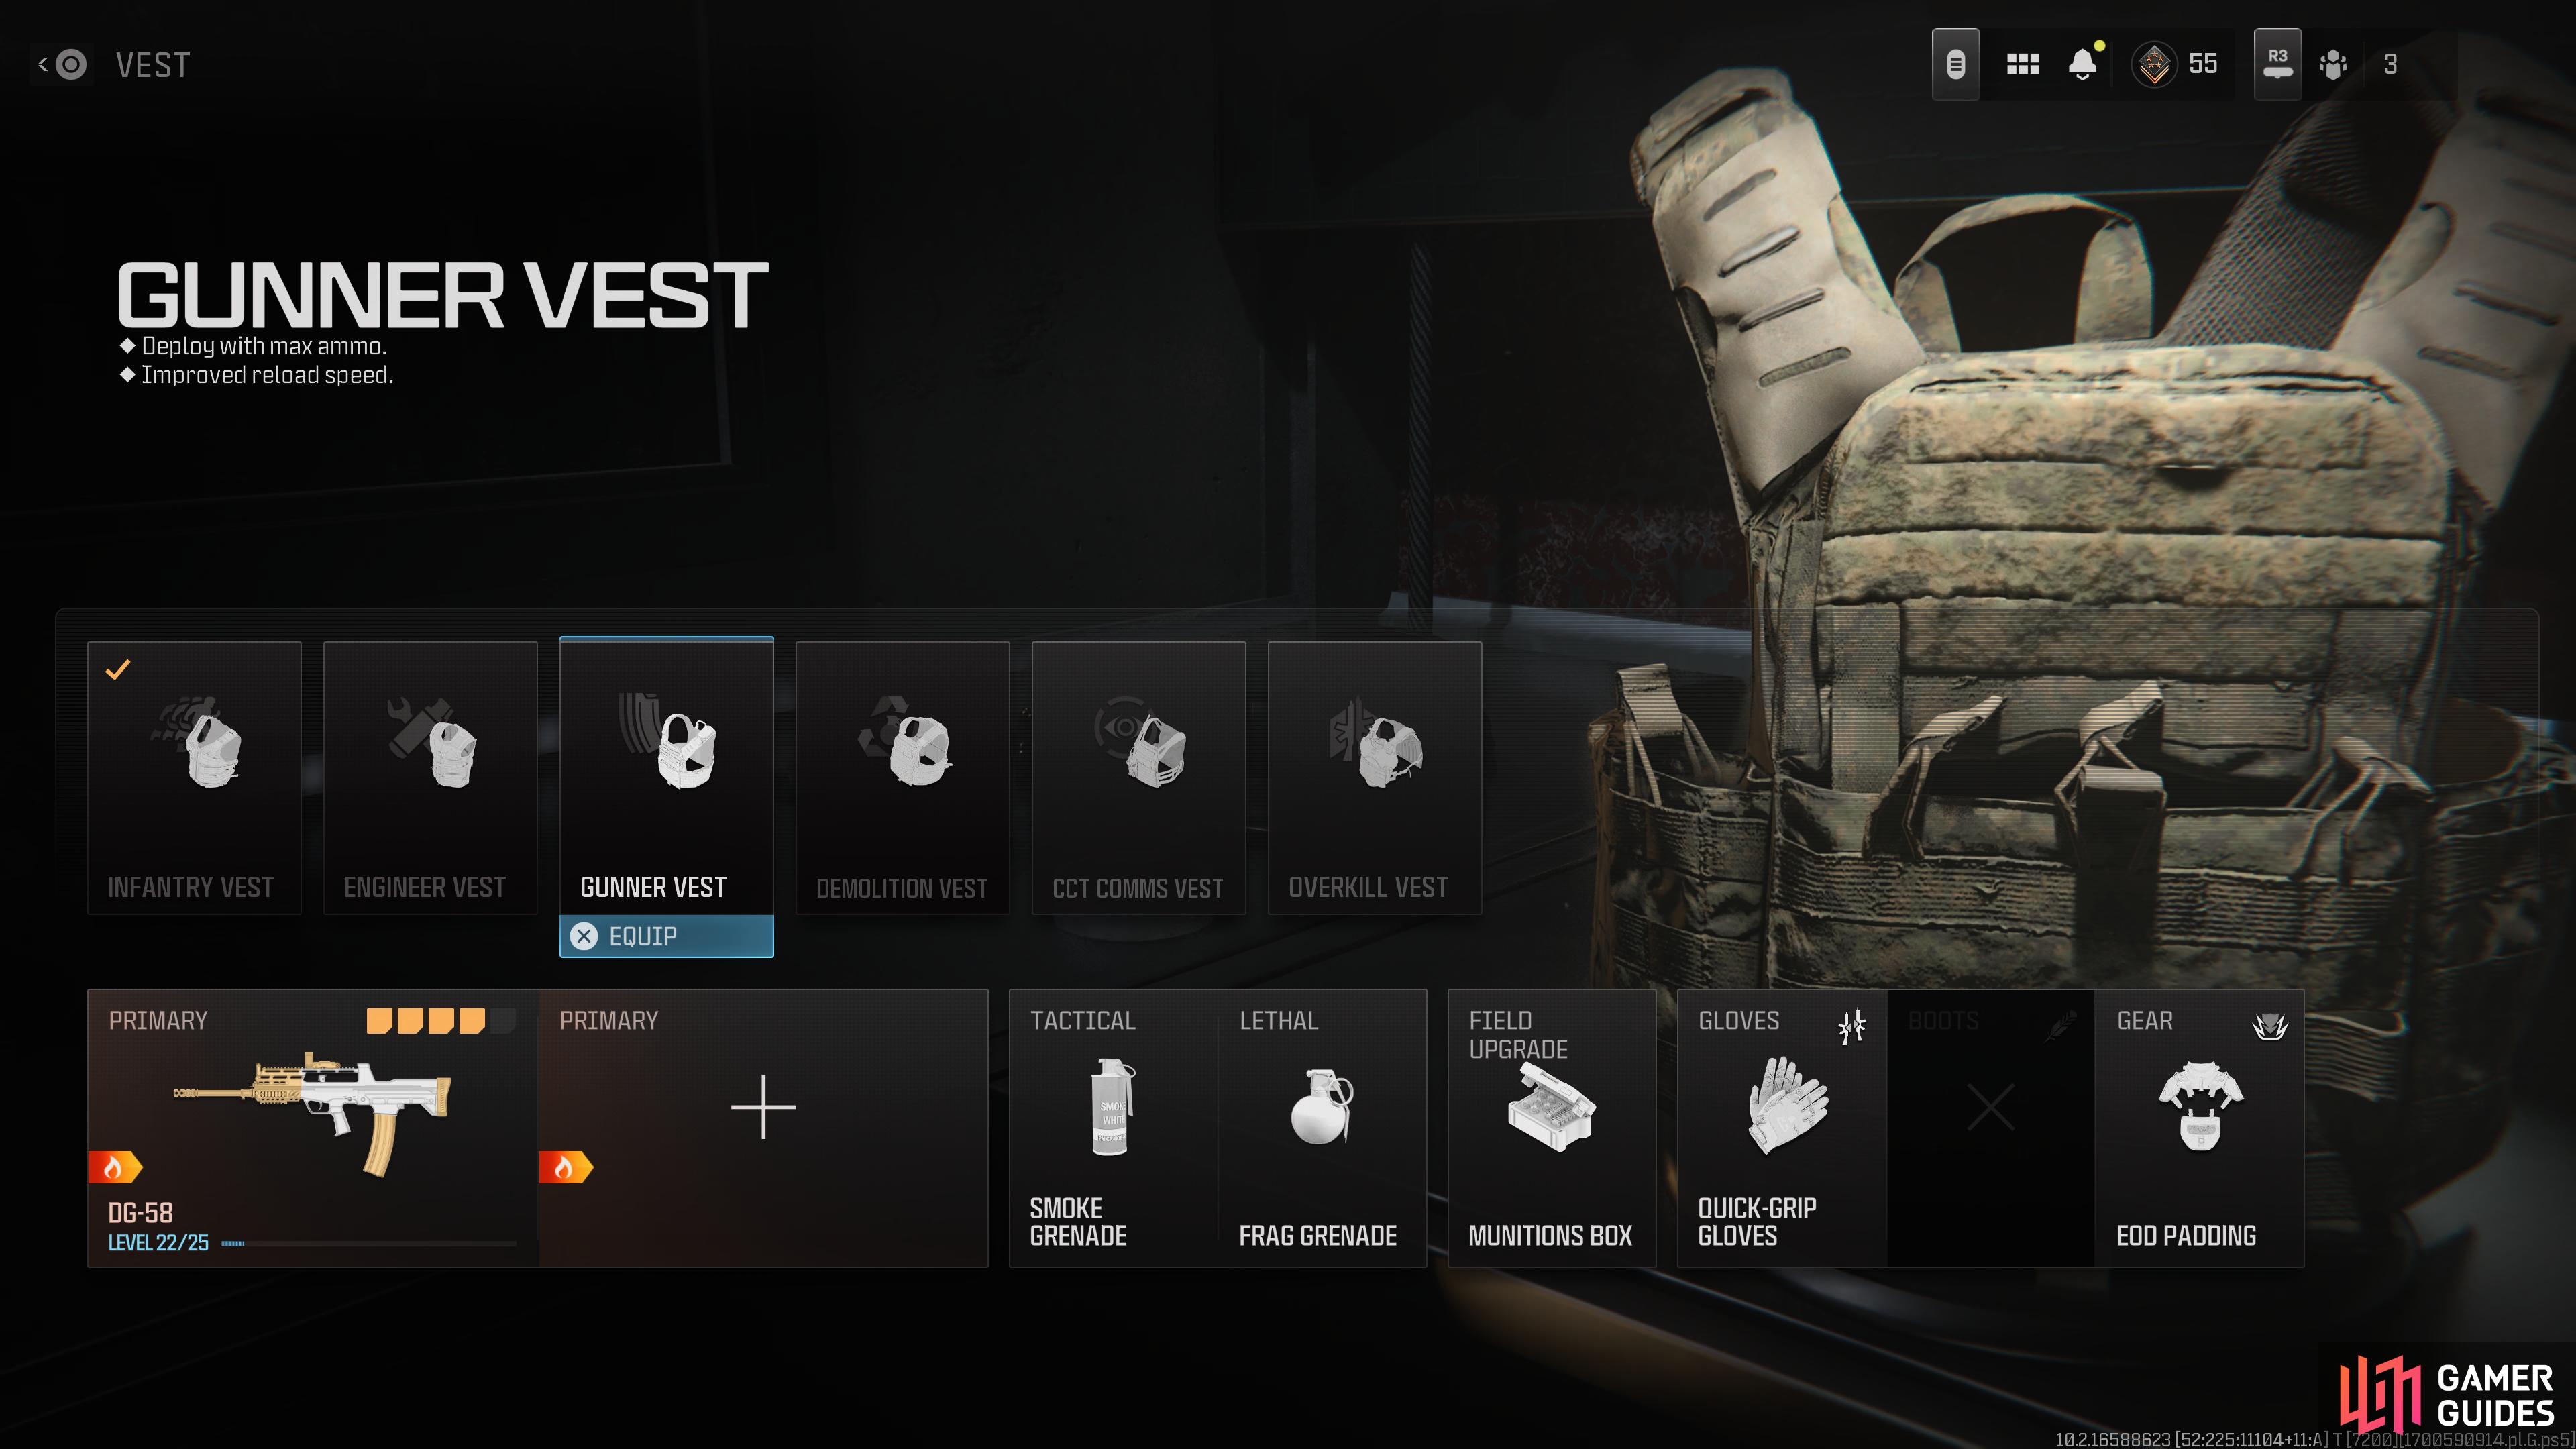 The Gunner Vest and the Overkill Vest will provide you with the Overkill Perk.